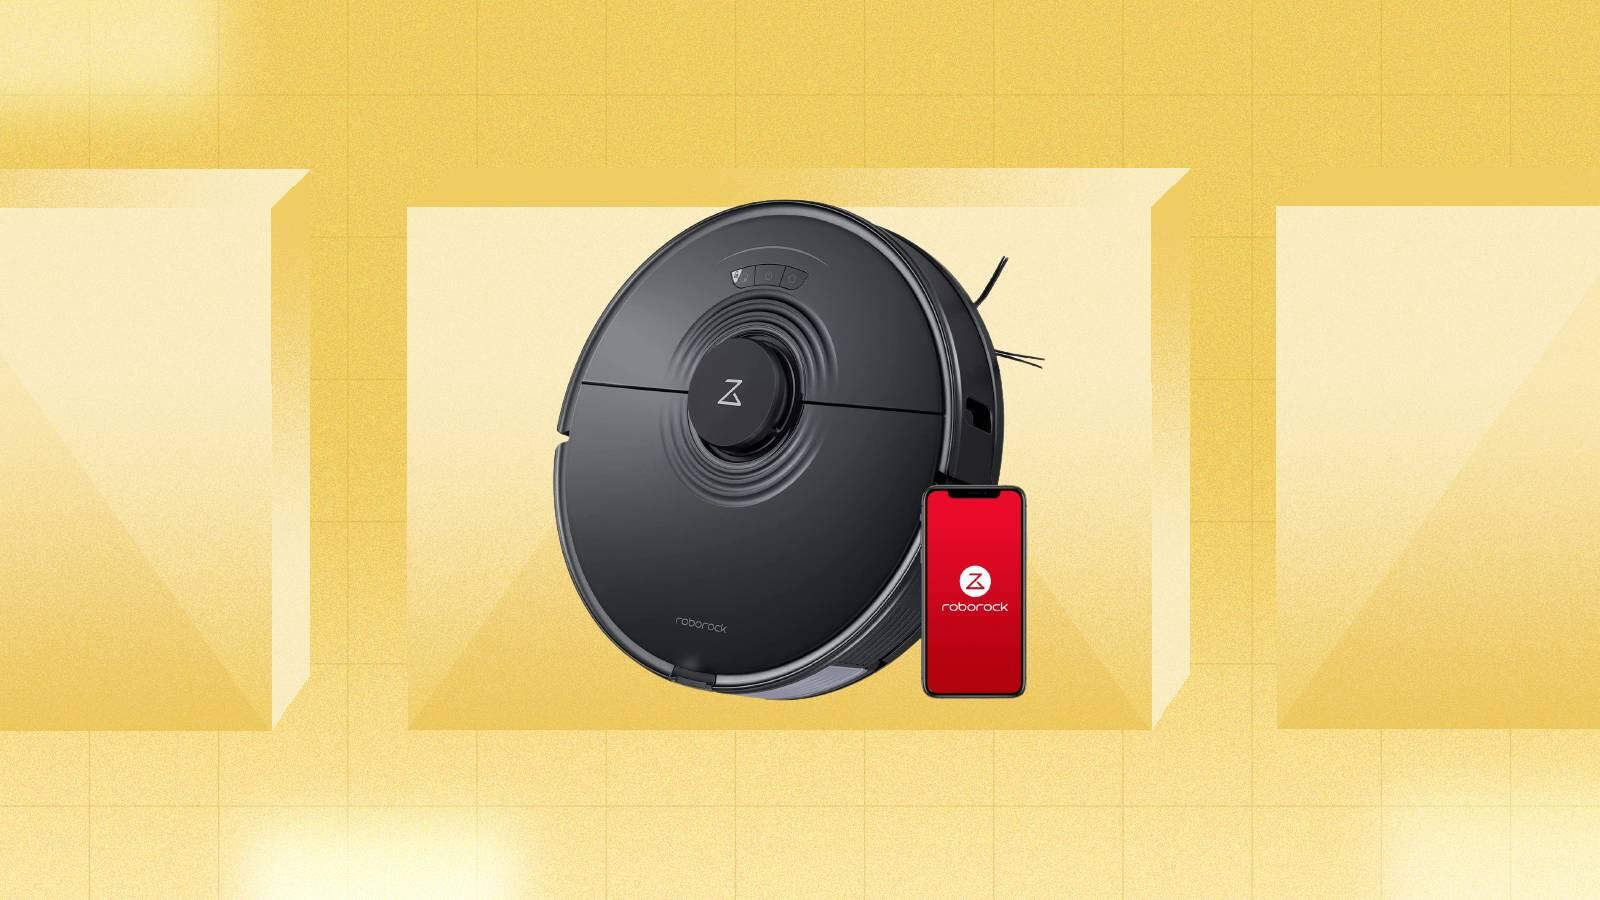 Knocks Up to $250 Off Roborock Robot Vacuums Ahead of Prime